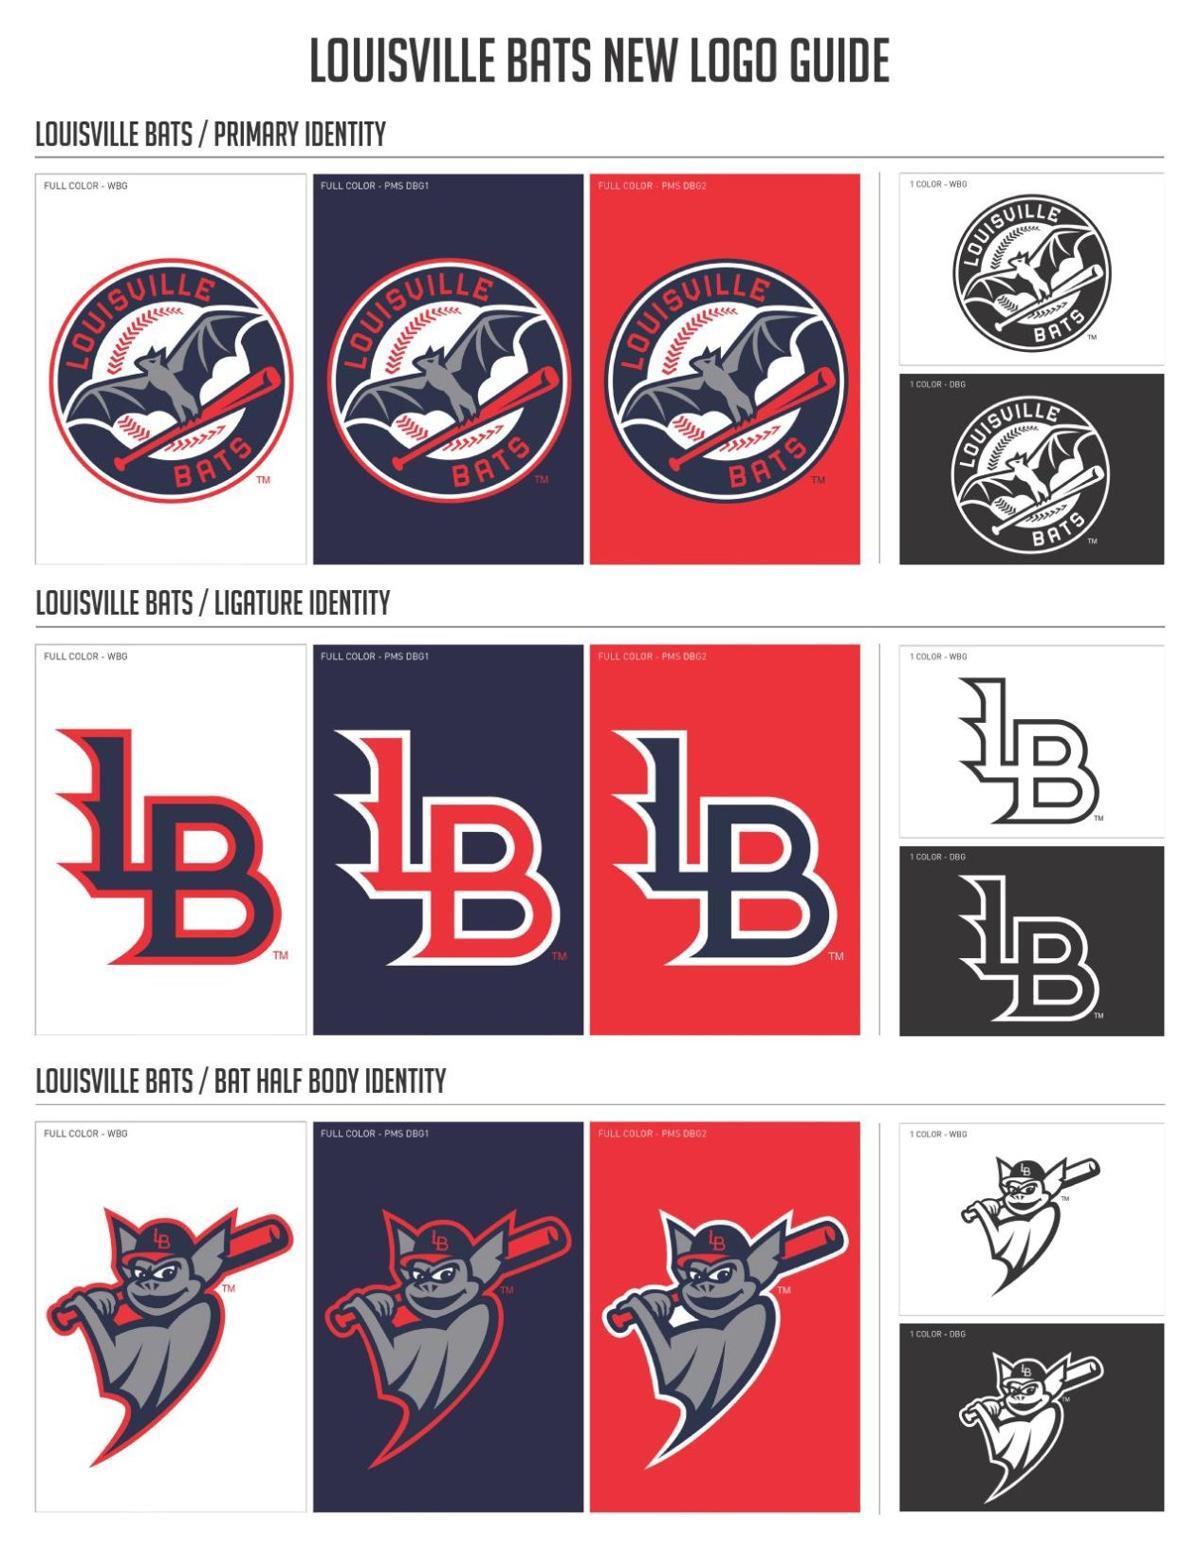 Louisville Bats New Logo - Louisville Bats new logos and uniforms